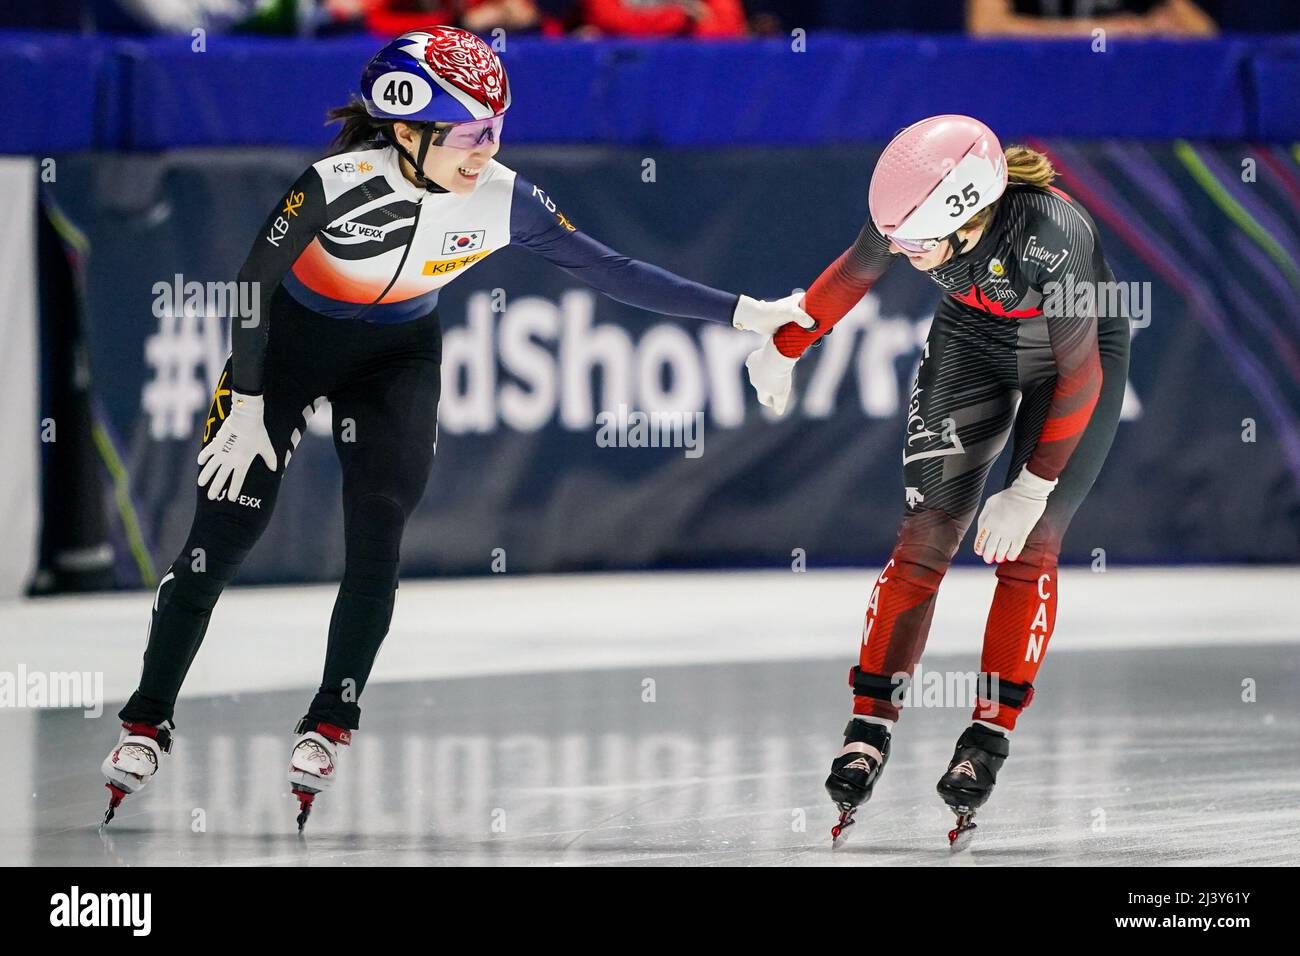 MONTREAL, CANADA - APRIL 10: Minjeong Choi of the Republic of Korea and Kim Boutin of Canada during Day 3 of the ISU World Short Track Championships at the Maurice Richard Arena on April 10, 2022 in Montreal, Canada (Photo by Andre Weening/Orange Pictures) Stock Photo